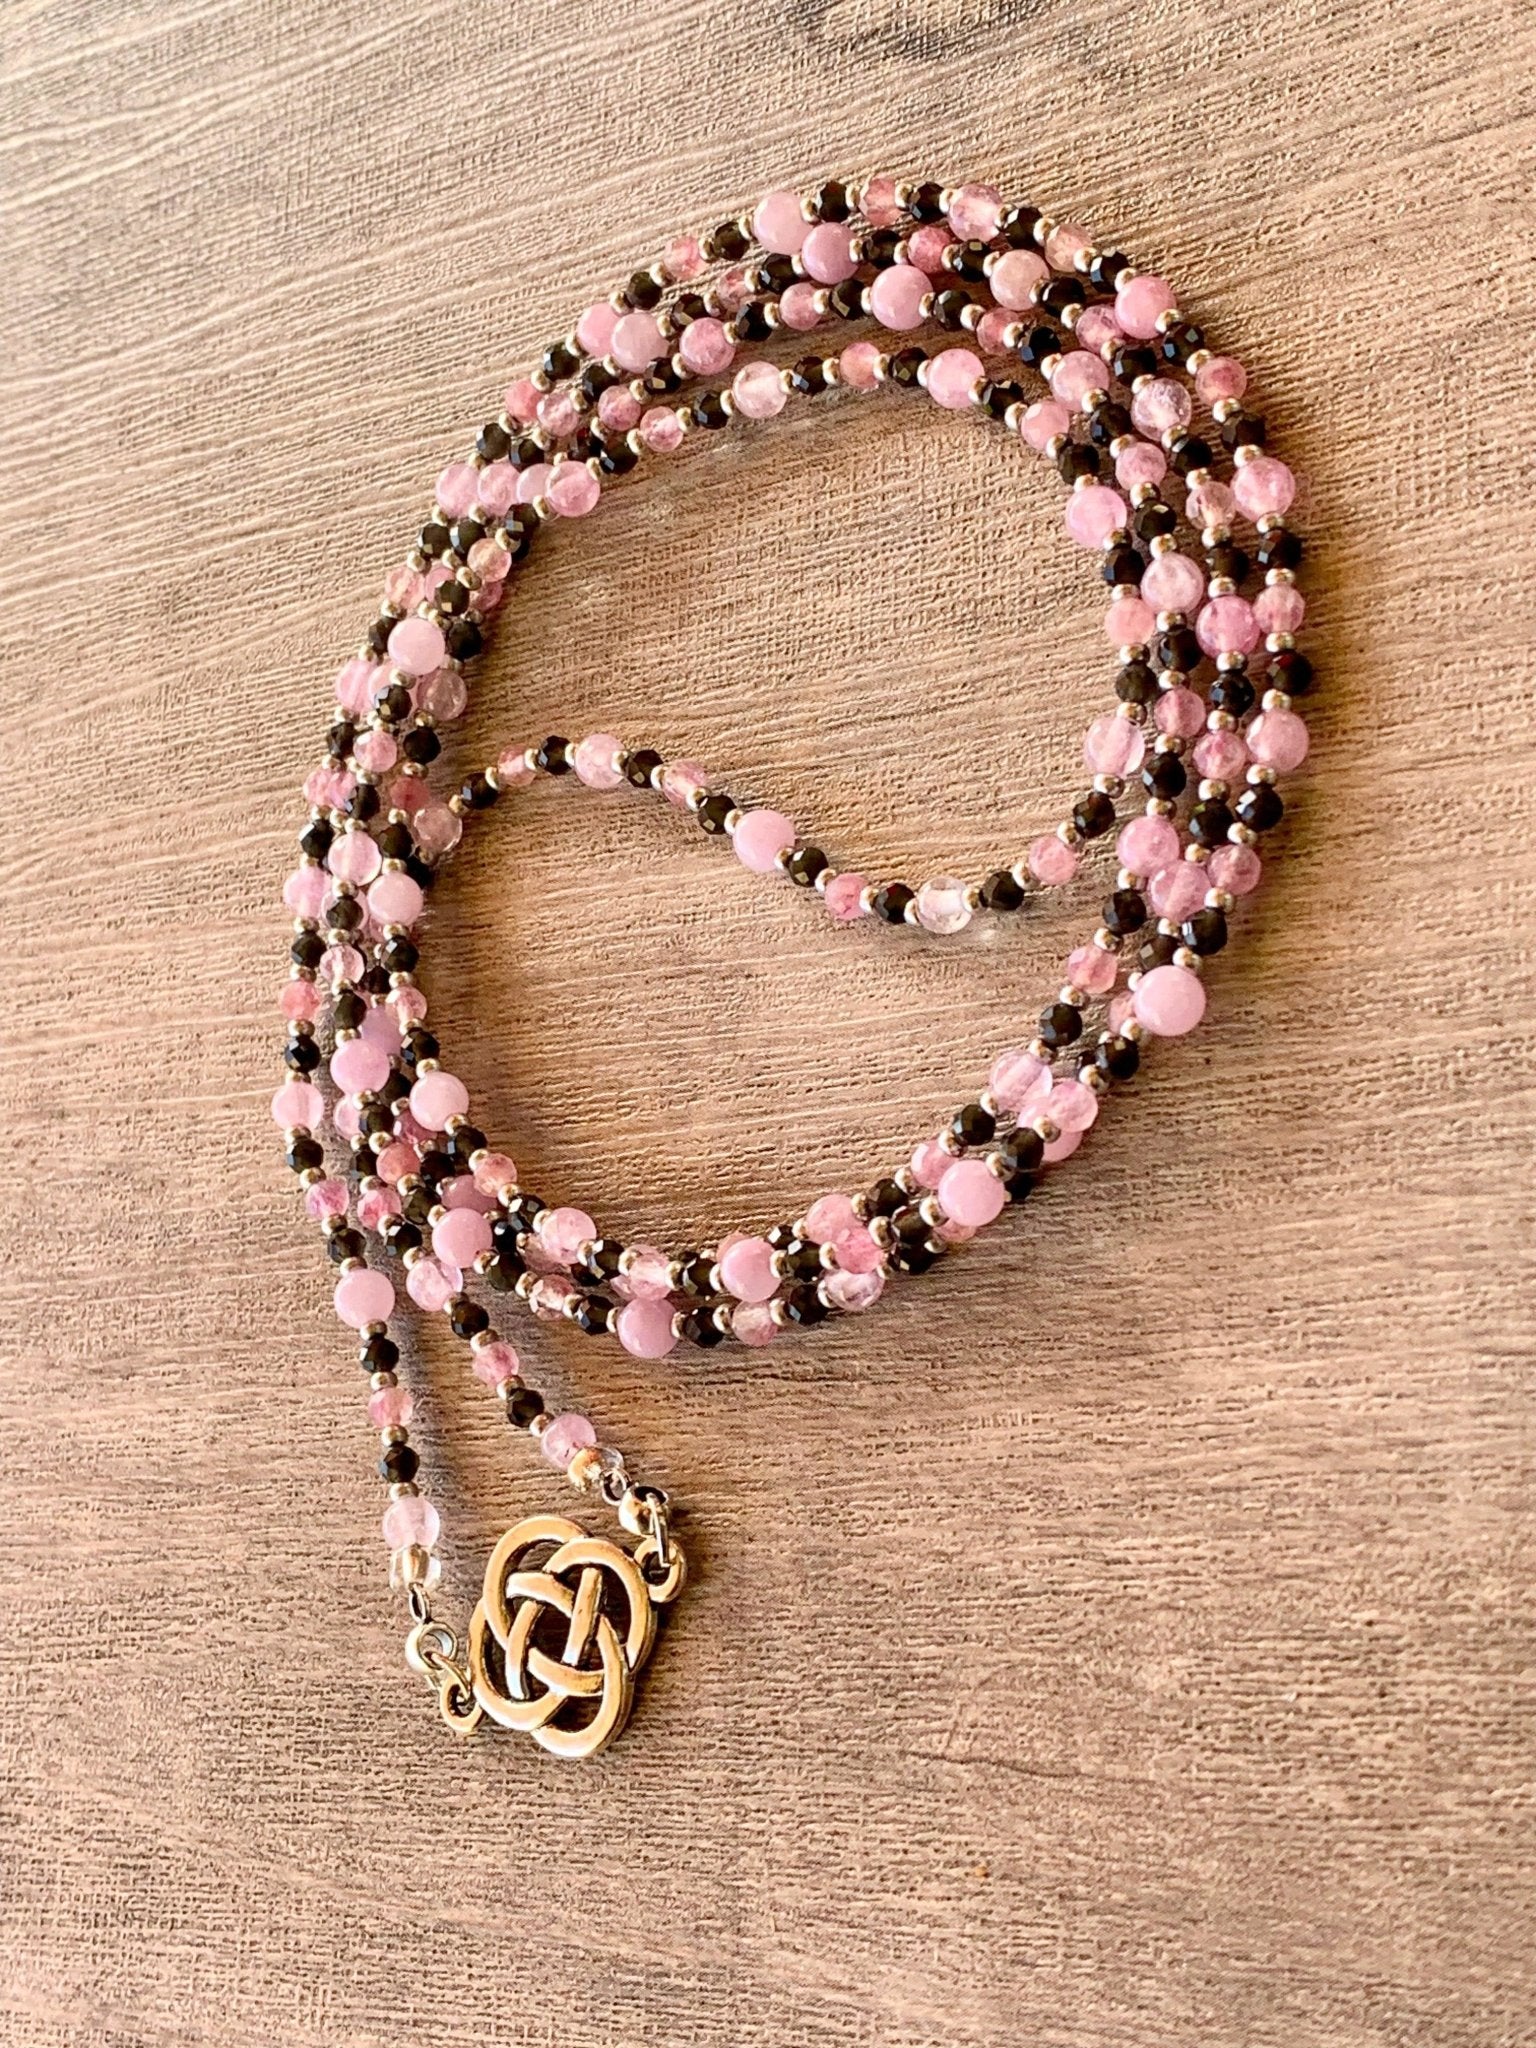 Giselle Handmade Pink Angelite, Pink Tourmaline, and Obsidian 42" Beaded Necklace - Born Mystics